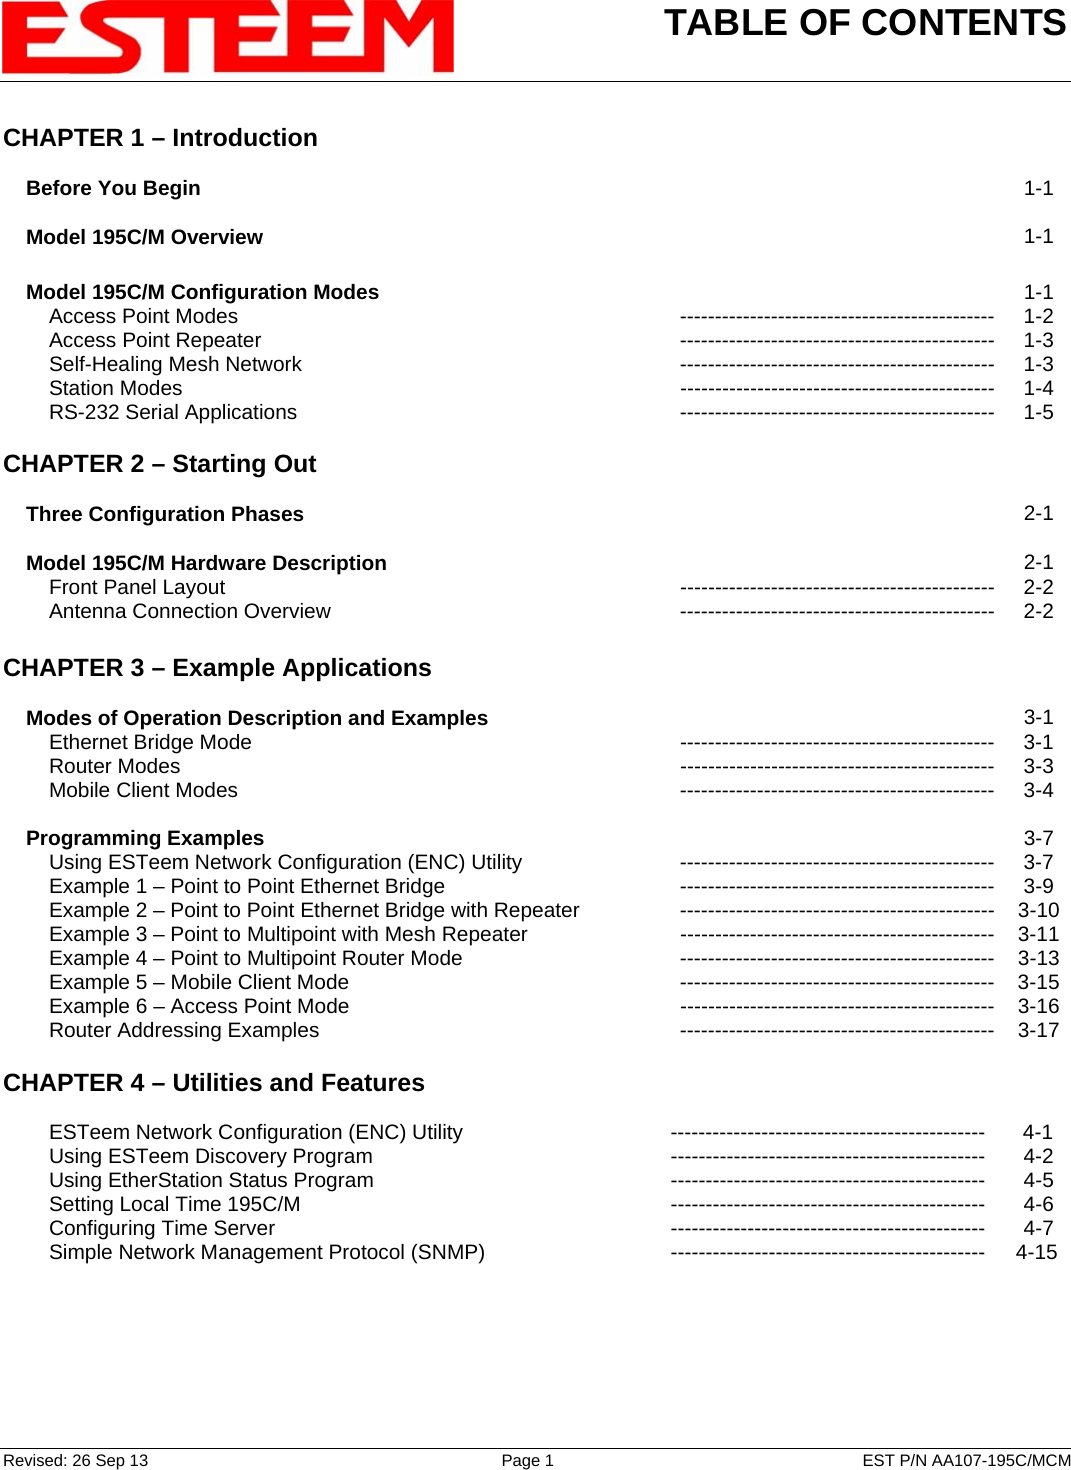 TABLE OF CONTENTS    Revised: 26 Sep 13  Page 1  EST P/N AA107-195C/MCM CHAPTER 1 – Introduction      Before You Begin   1-1      Model 195C/M Overview   1-1        Model 195C/M Configuration Modes   1-1         Access Point Modes --------------------------------------------- 1-2         Access Point Repeater --------------------------------------------- 1-3         Self-Healing Mesh Network --------------------------------------------- 1-3         Station Modes  --------------------------------------------- 1-4         RS-232 Serial Applications --------------------------------------------- 1-5    CHAPTER 2 – Starting Out          Three Configuration Phases   2-1        Model 195C/M Hardware Description   2-1         Front Panel Layout --------------------------------------------- 2-2         Antenna Connection Overview --------------------------------------------- 2-2    CHAPTER 3 – Example Applications          Modes of Operation Description and Examples   3-1         Ethernet Bridge Mode --------------------------------------------- 3-1         Router Modes  --------------------------------------------- 3-3         Mobile Client Modes --------------------------------------------- 3-4        Programming Examples   3-7         Using ESTeem Network Configuration (ENC) Utility --------------------------------------------- 3-7         Example 1 – Point to Point Ethernet Bridge --------------------------------------------- 3-9         Example 2 – Point to Point Ethernet Bridge with Repeater --------------------------------------------- 3-10         Example 3 – Point to Multipoint with Mesh Repeater  --------------------------------------------- 3-11         Example 4 – Point to Multipoint Router Mode --------------------------------------------- 3-13         Example 5 – Mobile Client Mode  --------------------------------------------- 3-15         Example 6 – Access Point Mode  --------------------------------------------- 3-16         Router Addressing Examples   --------------------------------------------- 3-17   CHAPTER 4 – Utilities and Features             ESTeem Network Configuration (ENC) Utility  ---------------------------------------------  4-1         Using ESTeem Discovery Program  ---------------------------------------------  4-2         Using EtherStation Status Program --------------------------------------------- 4-5         Setting Local Time 195C/M --------------------------------------------- 4-6         Configuring Time Server --------------------------------------------- 4-7         Simple Network Management Protocol (SNMP) ---------------------------------------------  4-15 